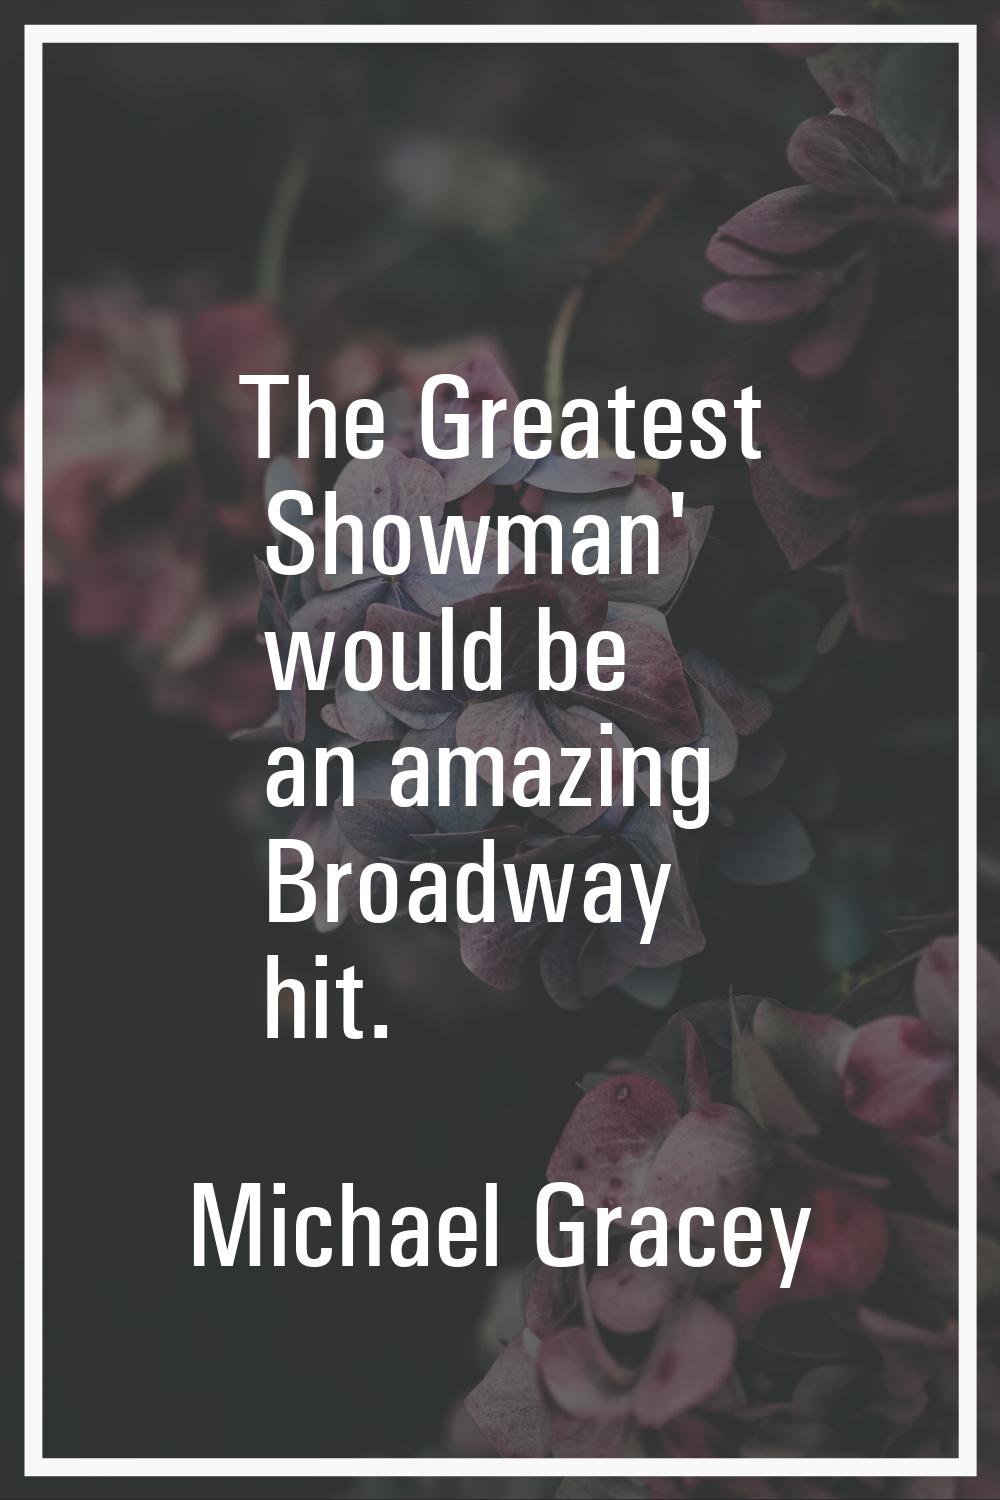 The Greatest Showman' would be an amazing Broadway hit.